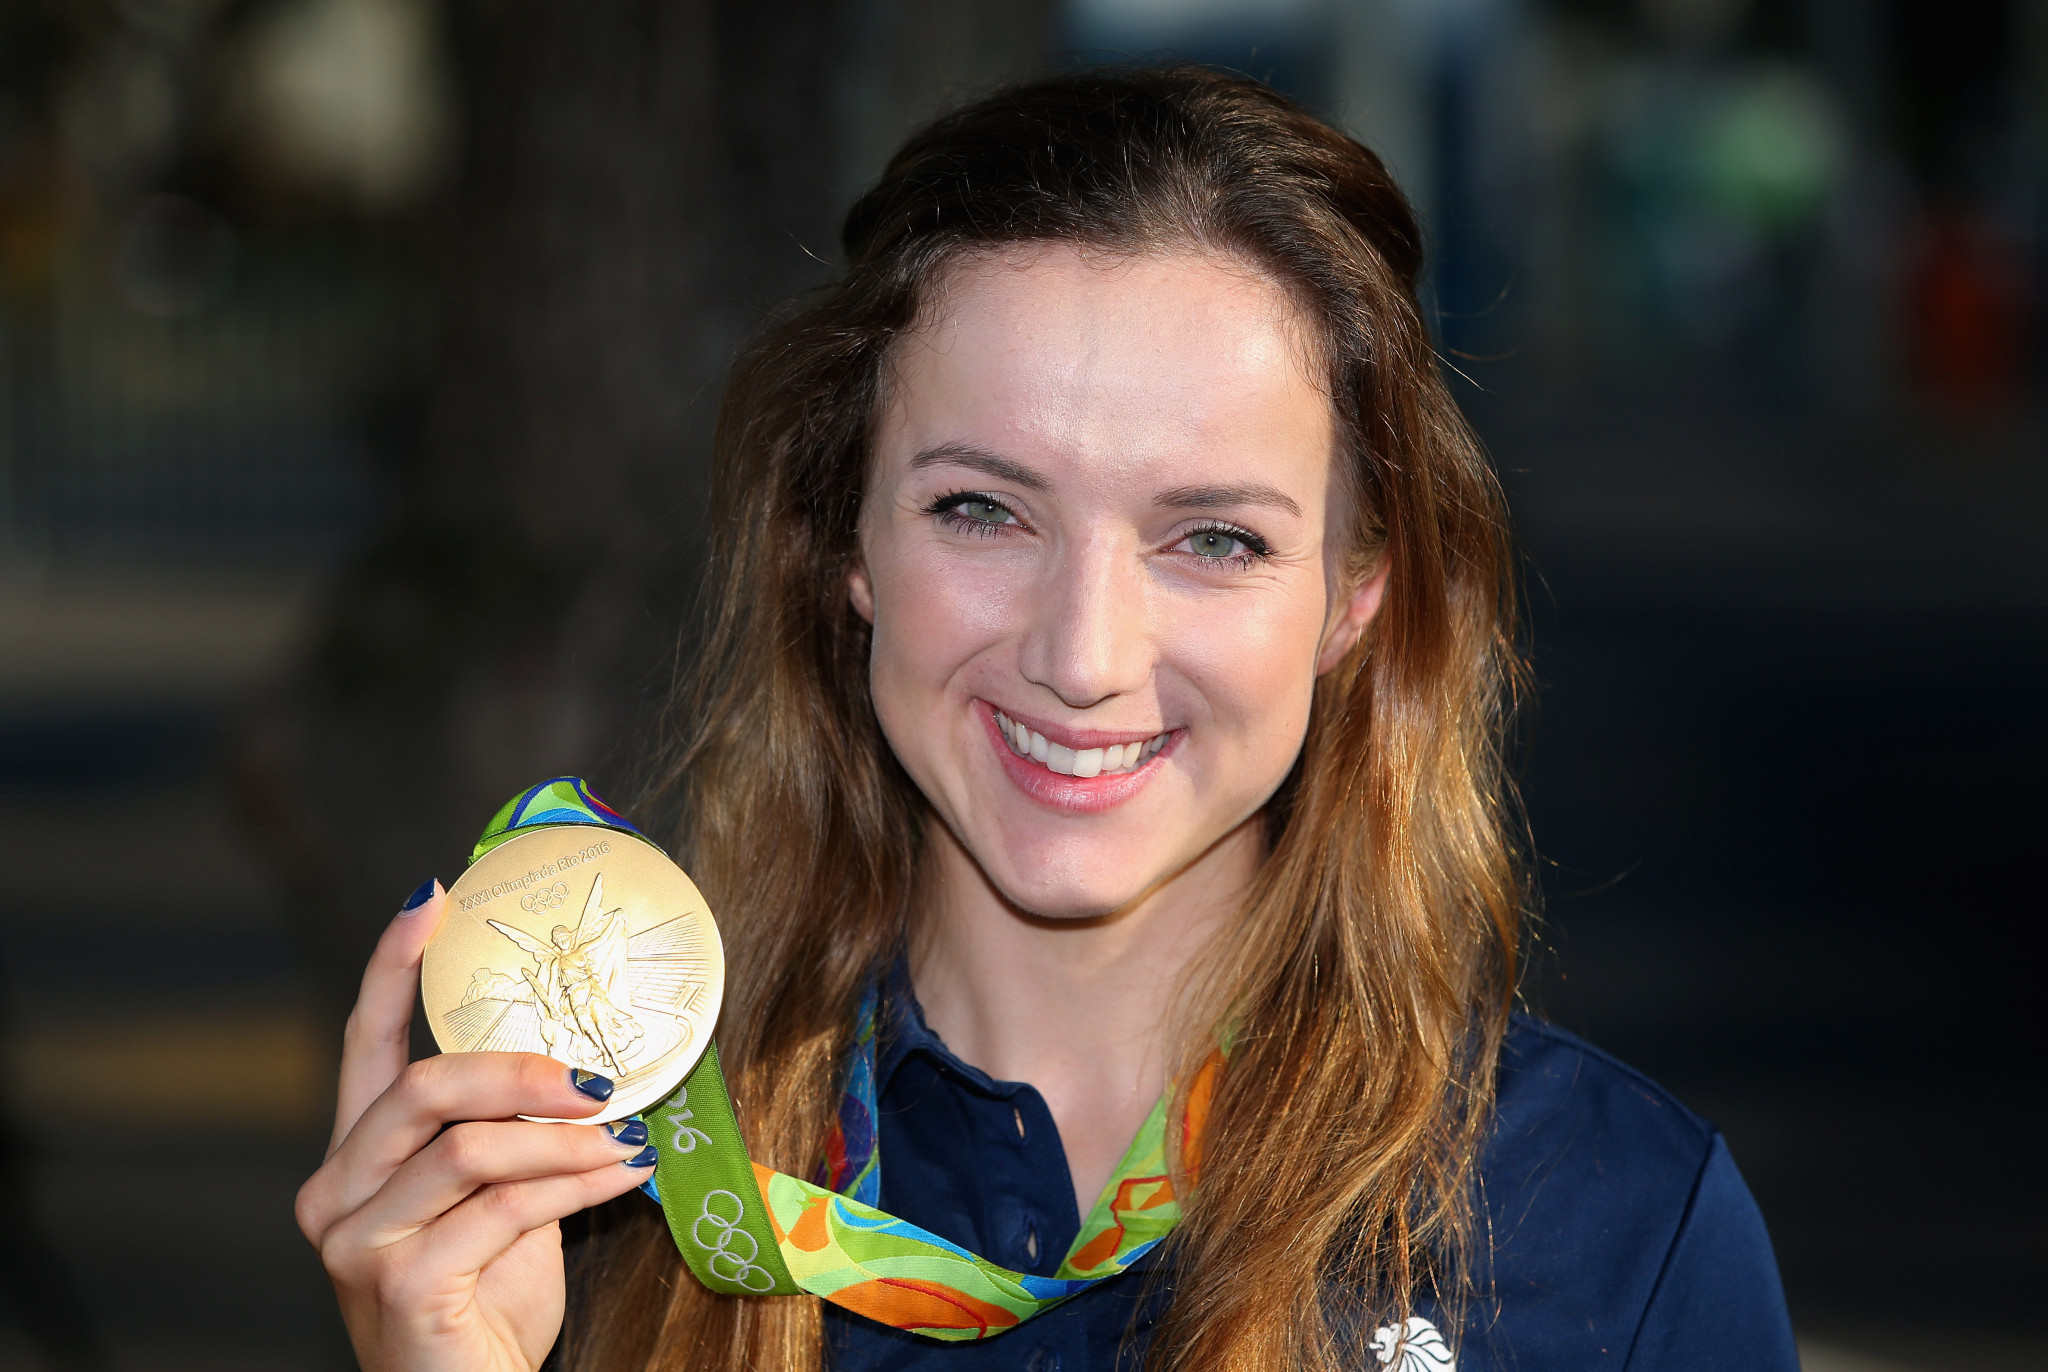 Elinor Barker, who won gold at Rio 2016, is hoping a vaccine will "save" Tokyo 2020 by allowing the presence of spectators ©Getty Images